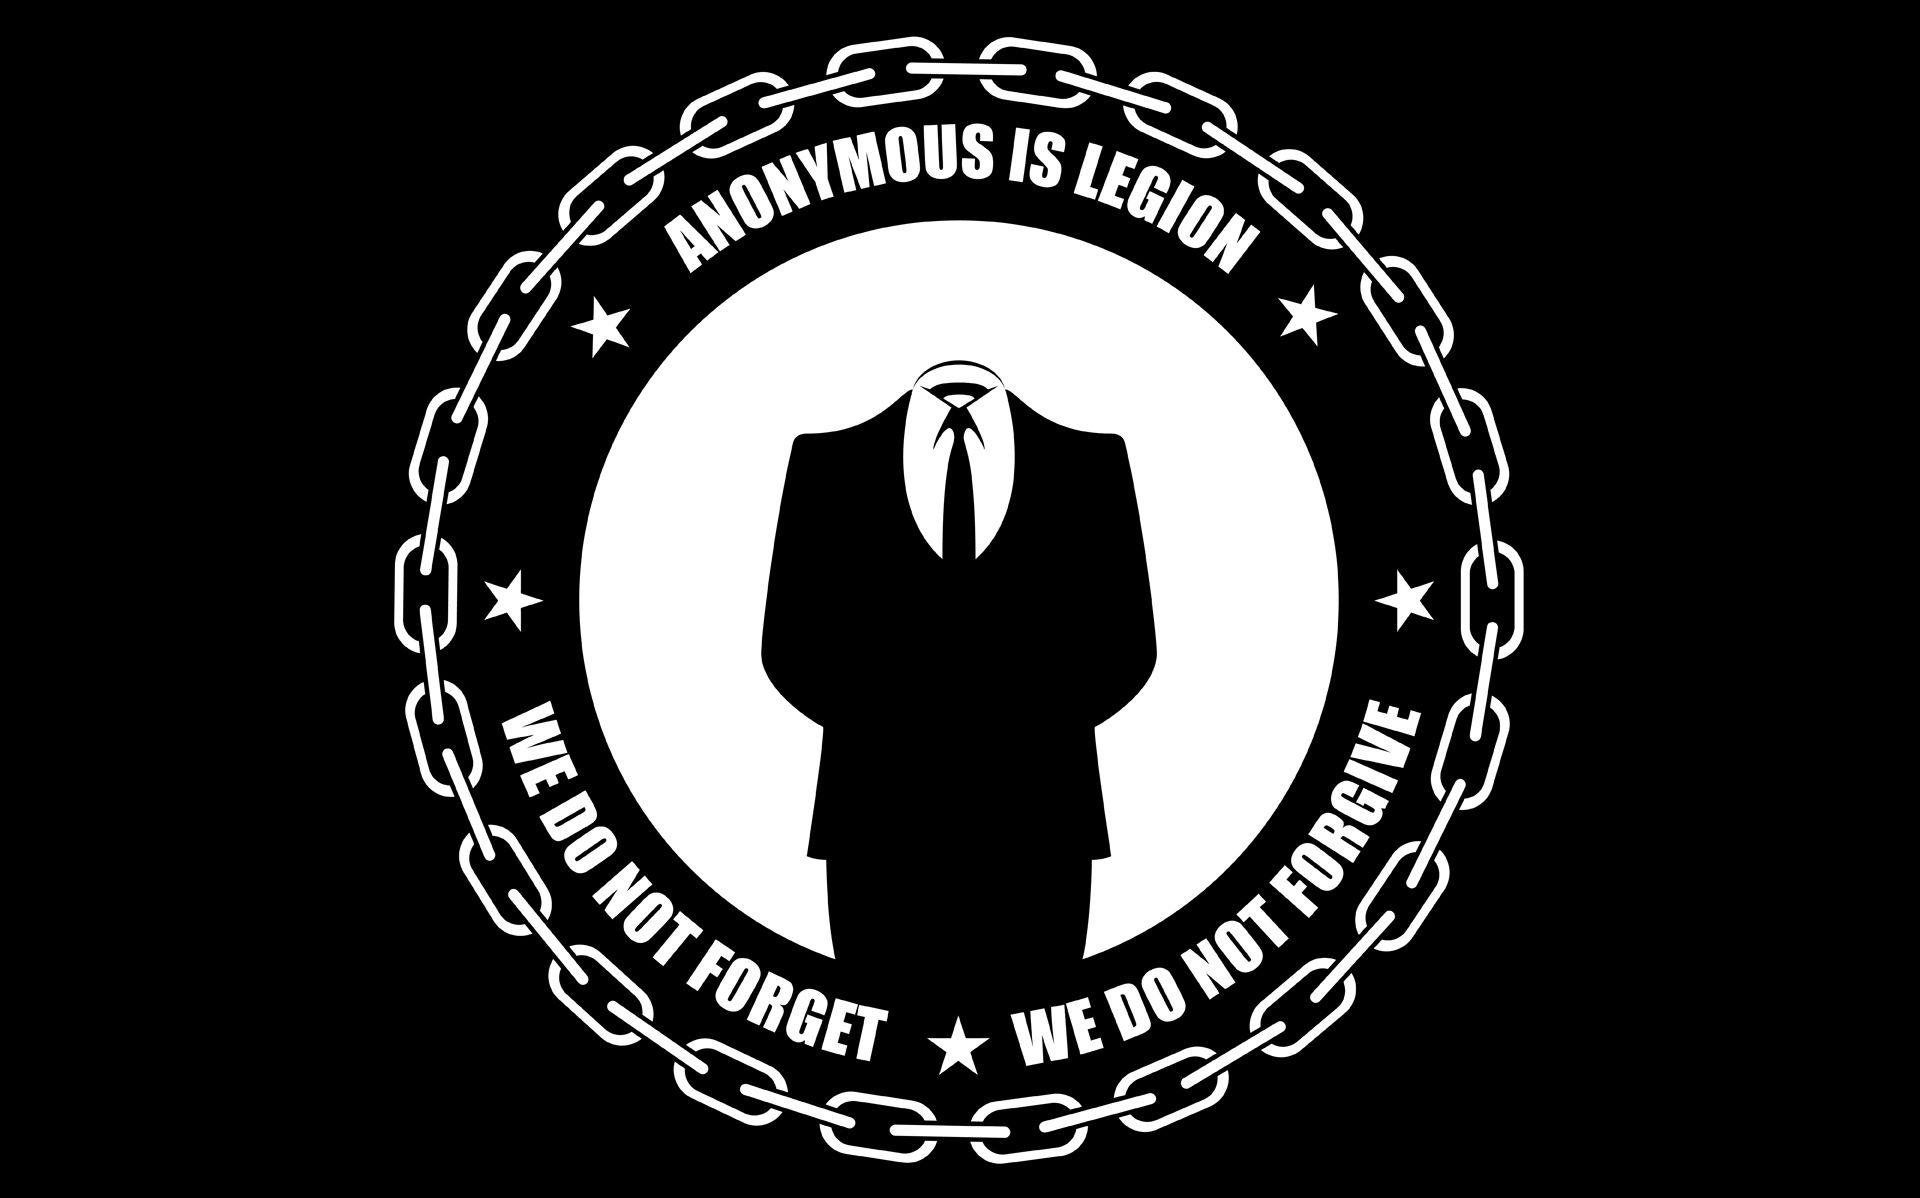 Anonymous Logo Wallpapers - Top Free Anonymous Logo Backgrounds ...